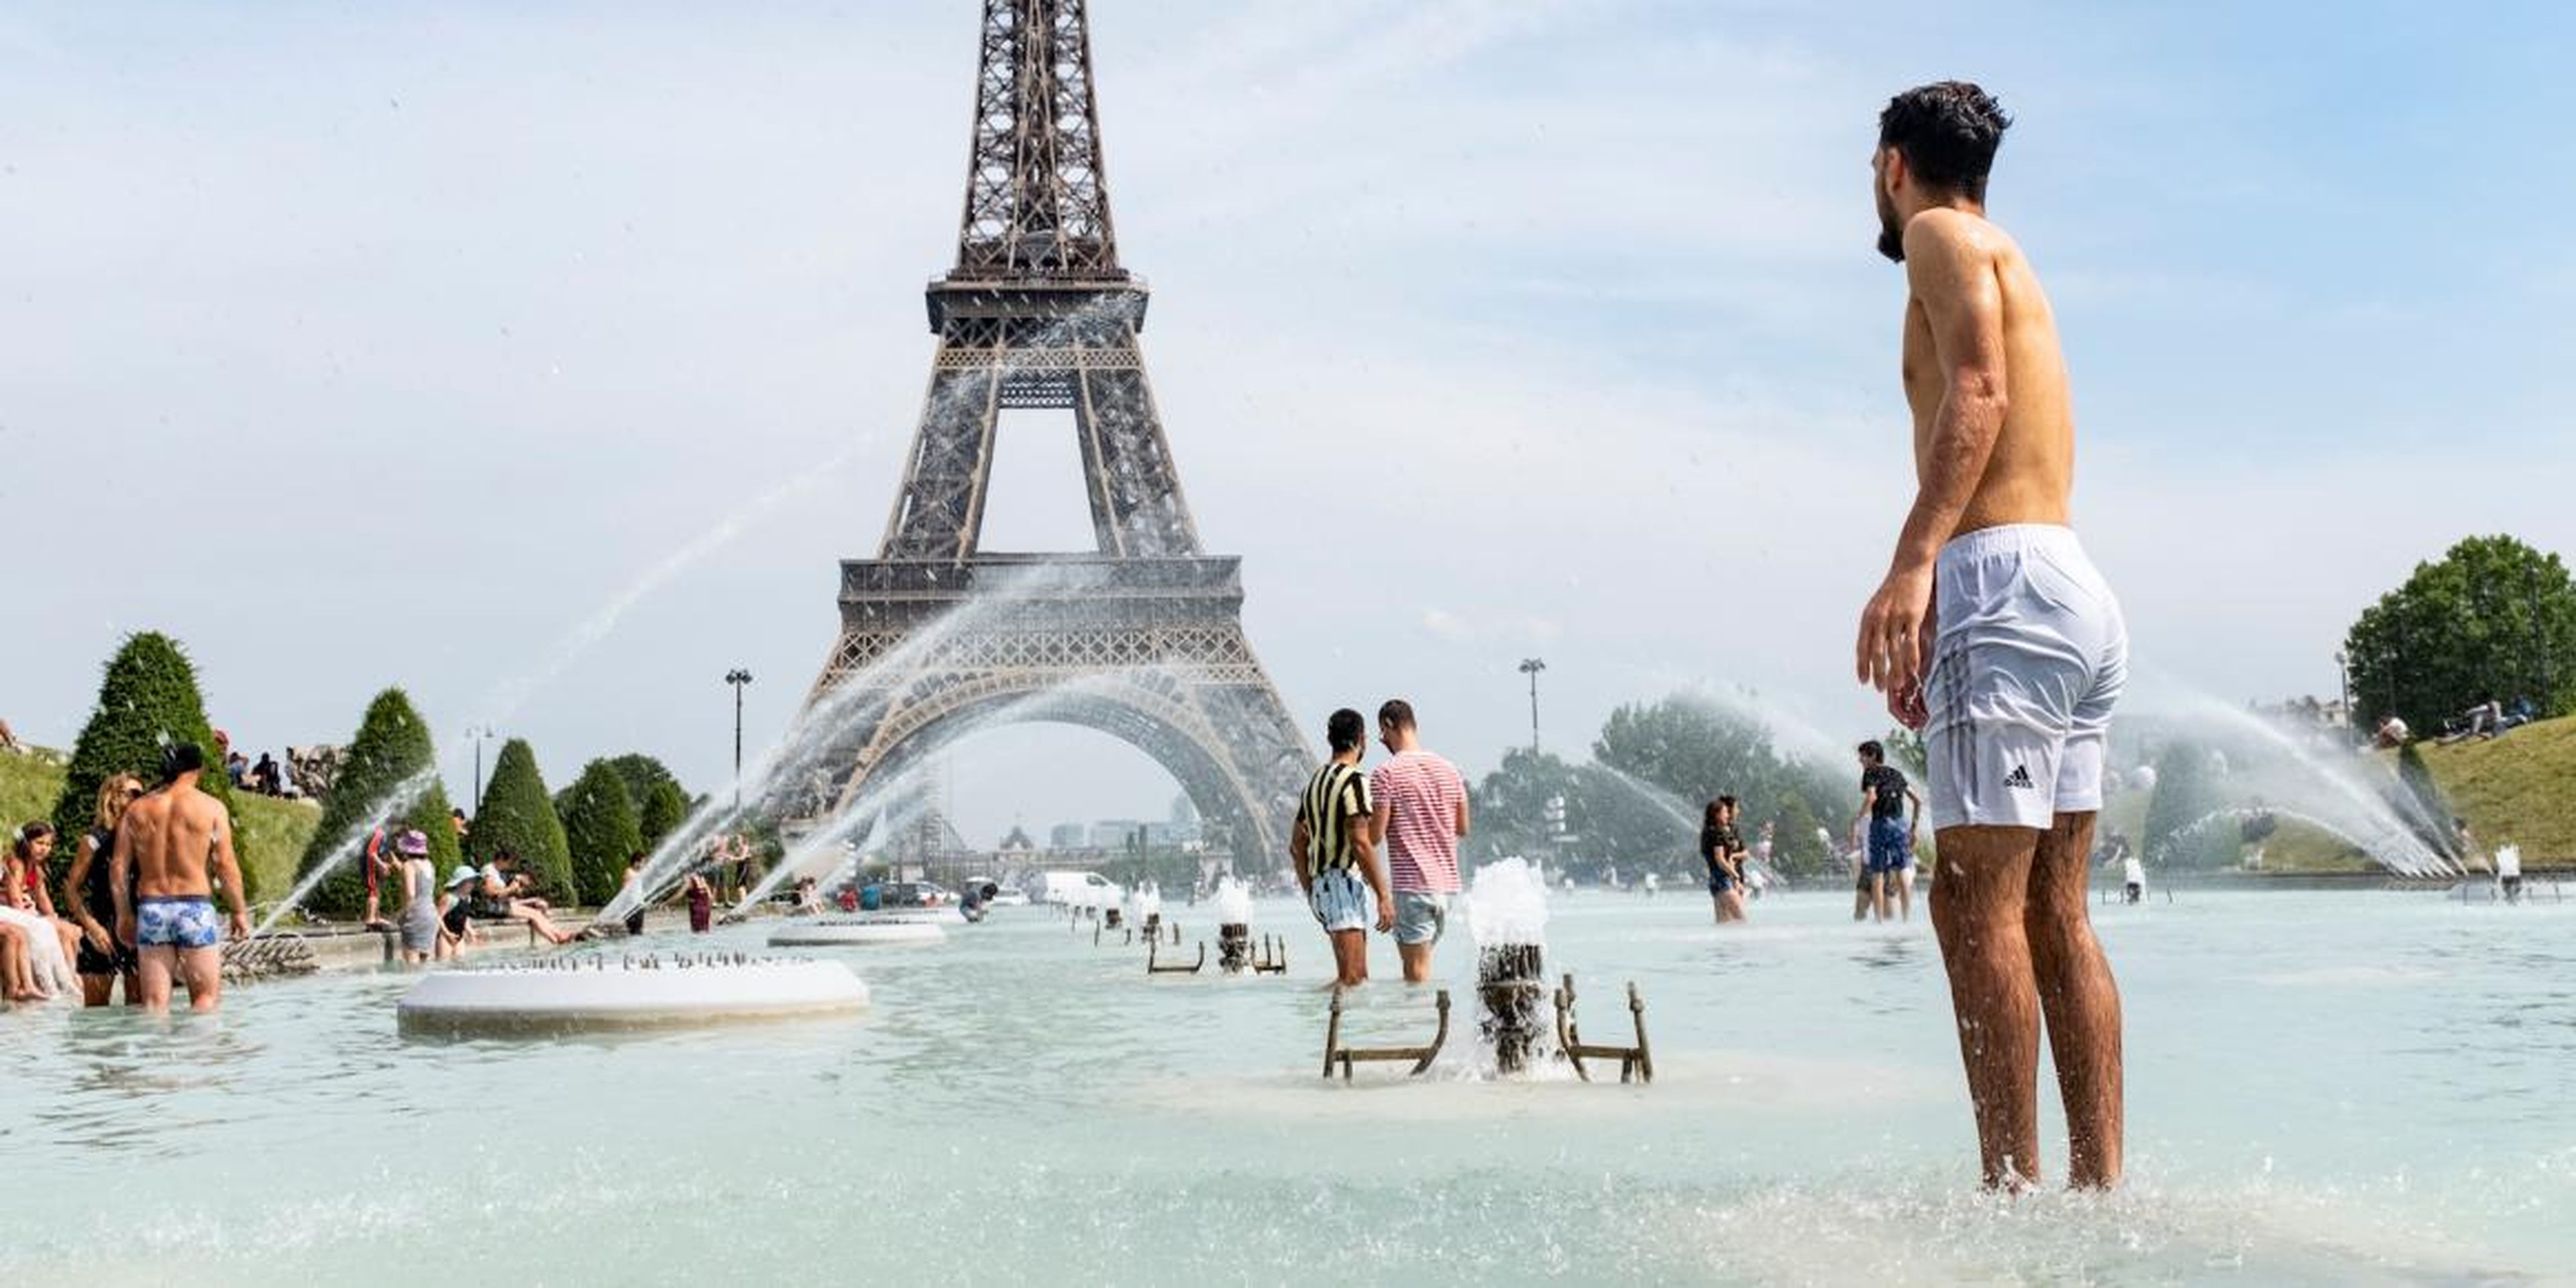 Tourists and Parisians cooling off in the water of the Trocadero fountain at the foot of the Eiffel Tower on Monday.